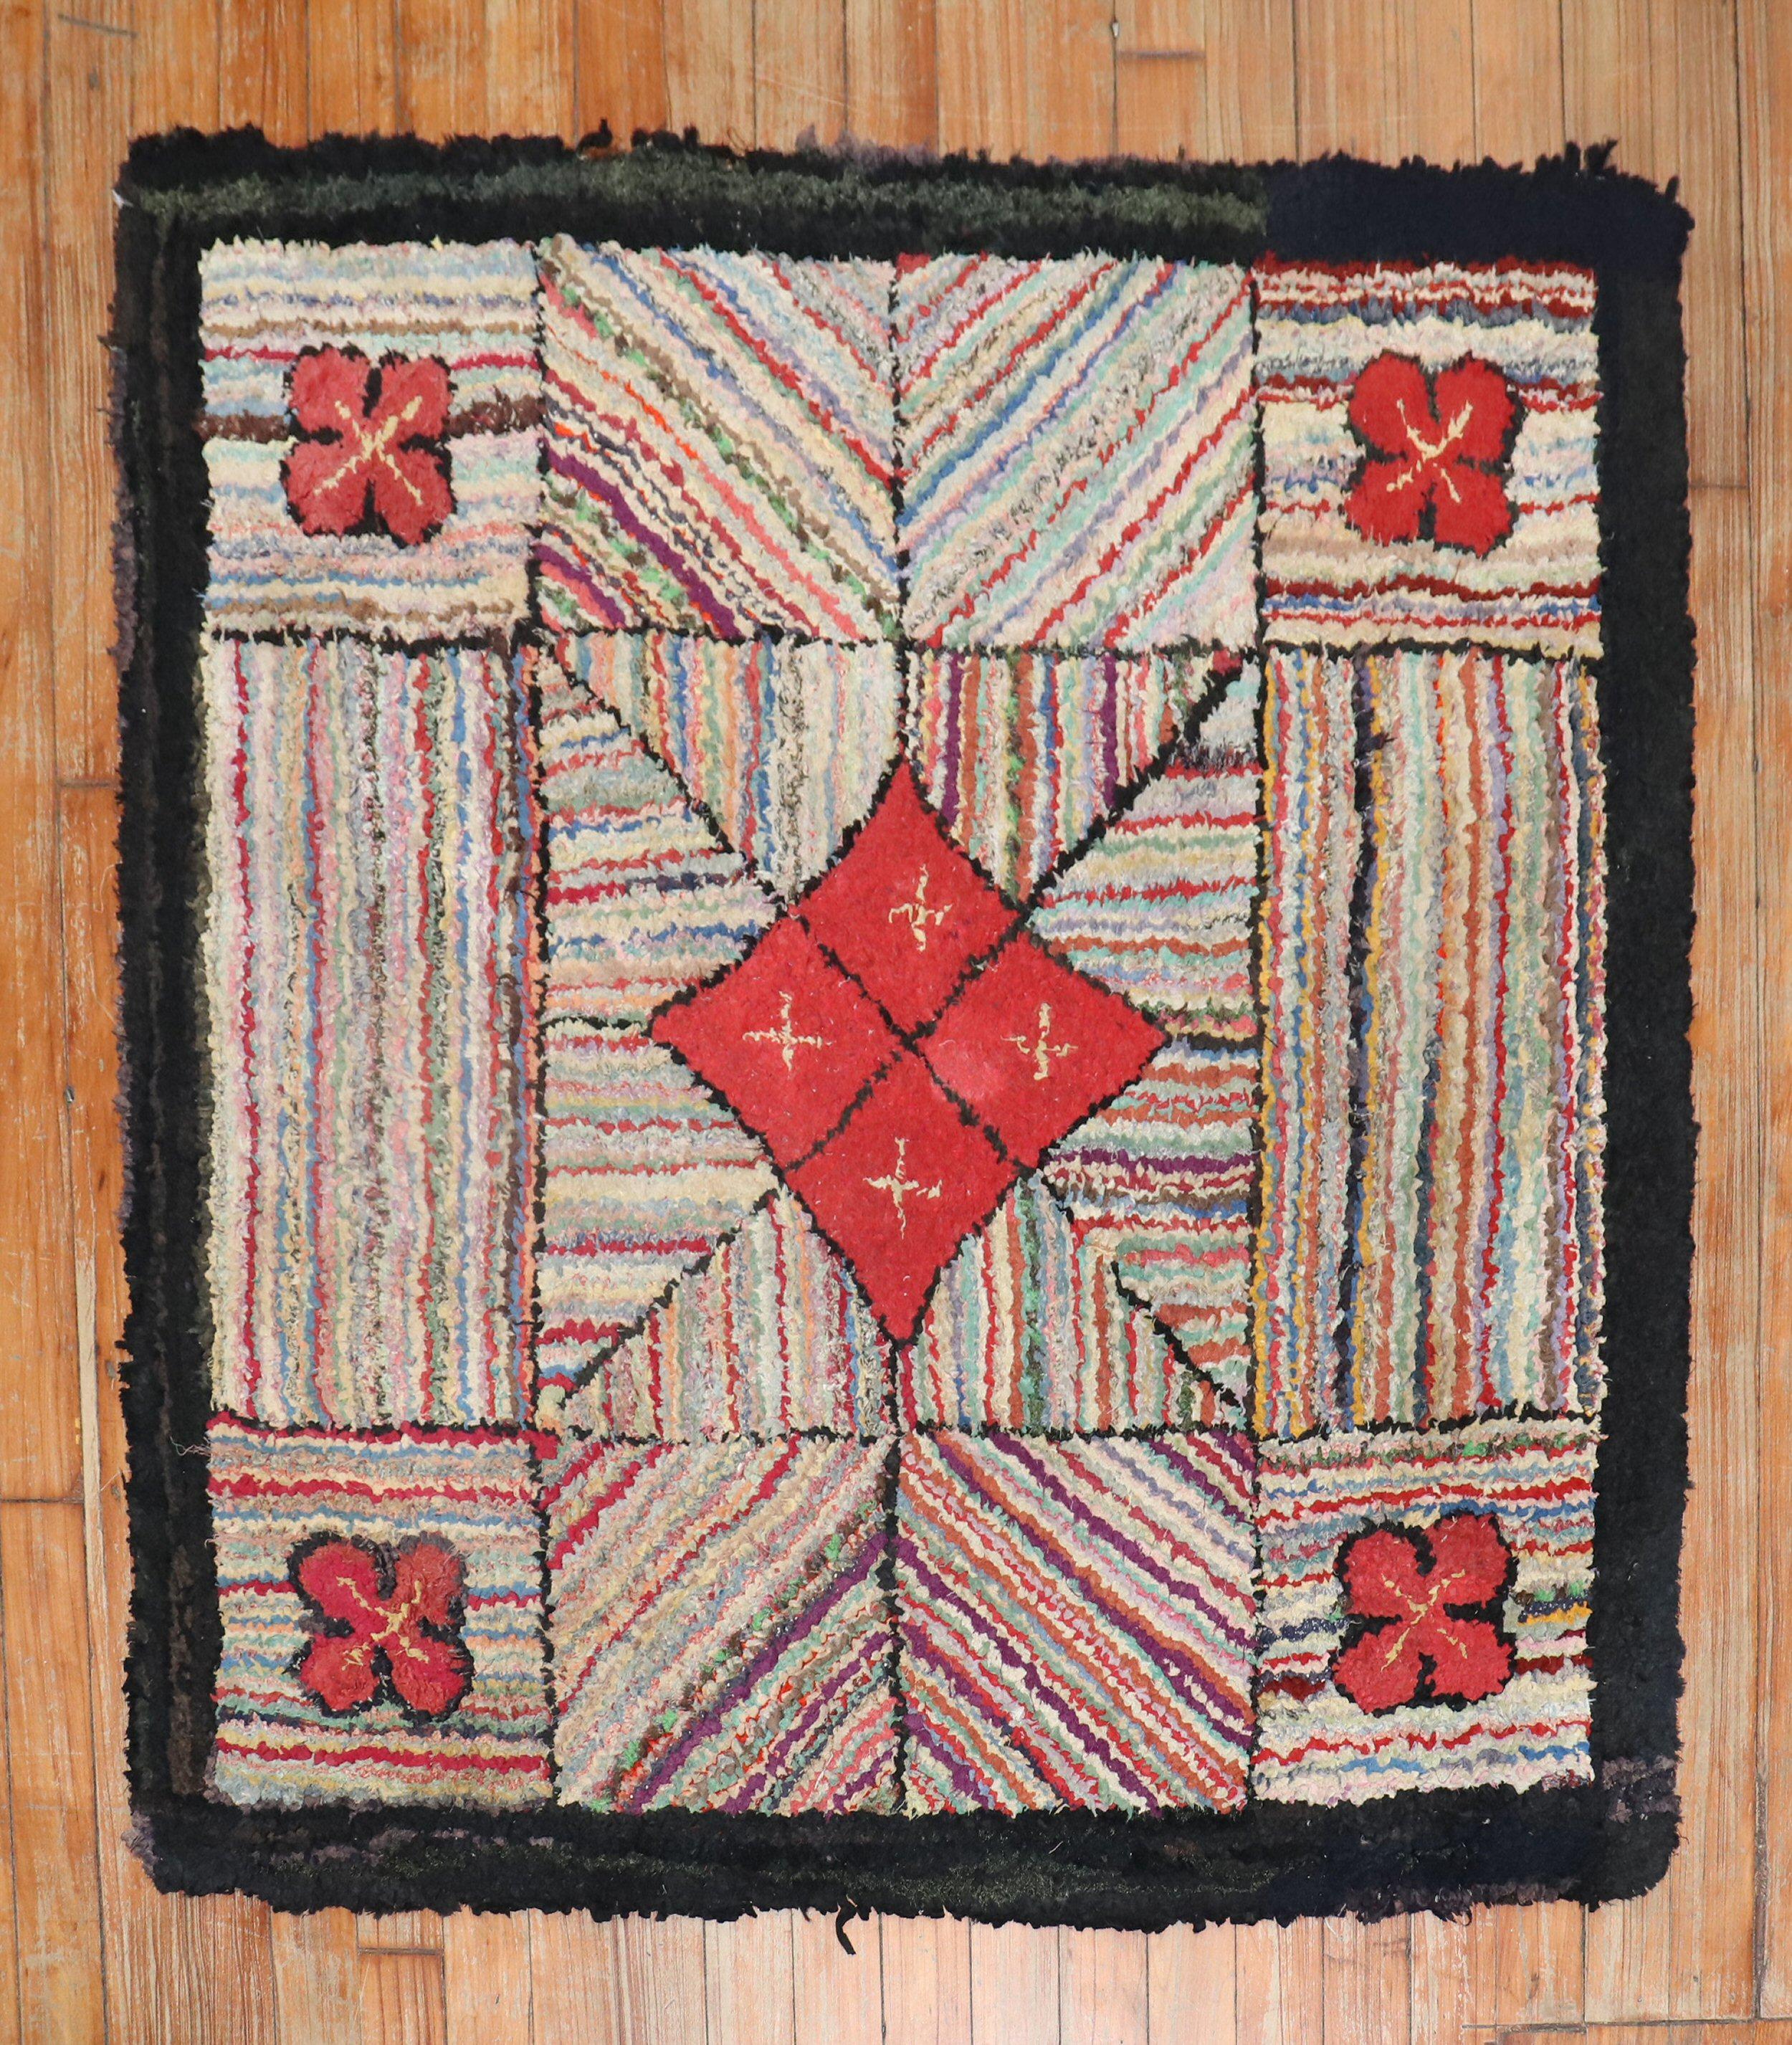 A handmade decorative American hooked rug from the middle of the 20th century 

Measures: 3'4